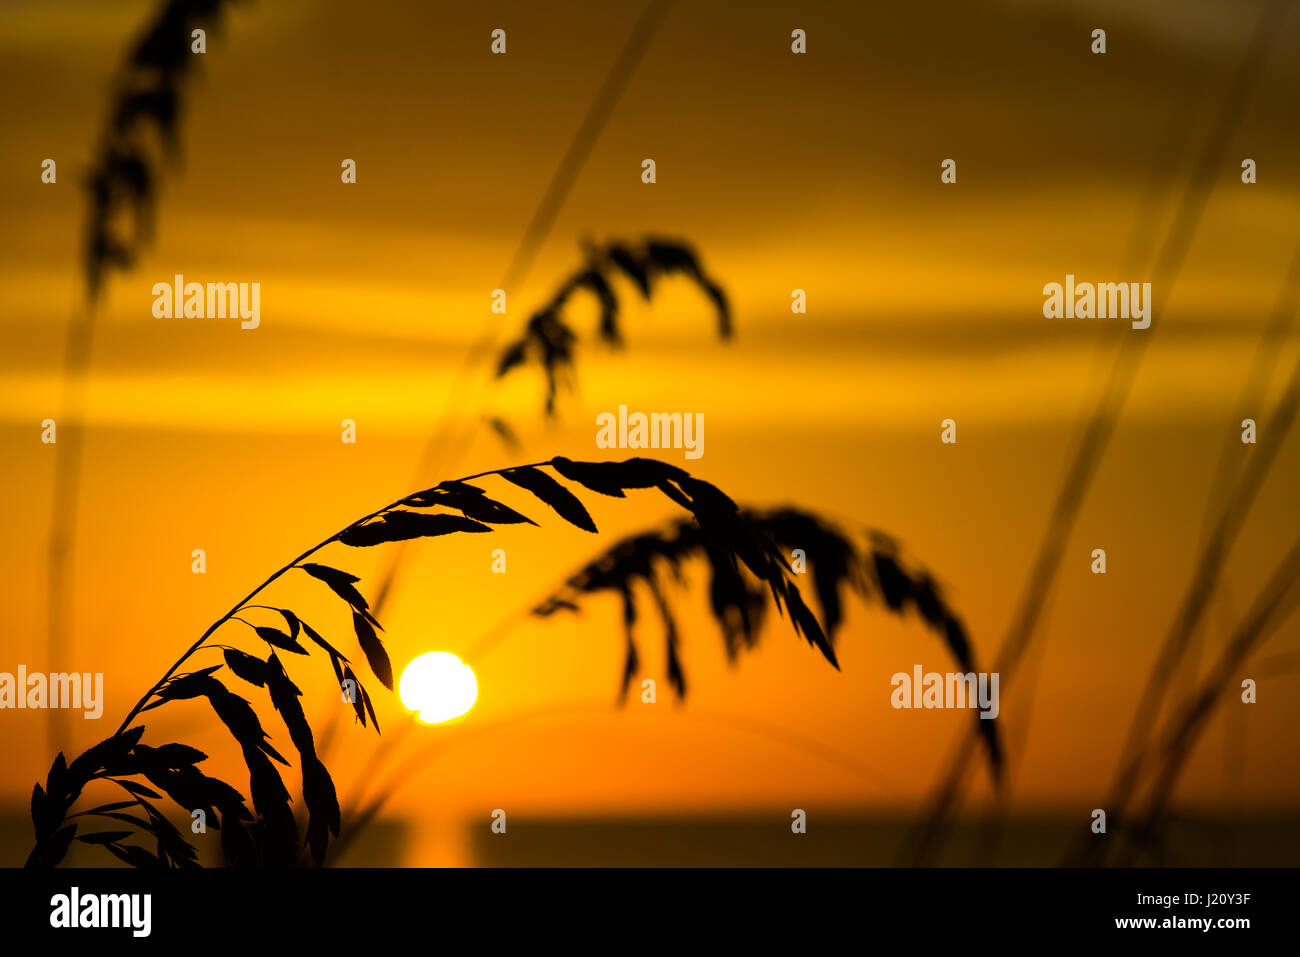 Sea oats and grass in silhouette at the beach as the golden warm sun reflects back and brings a close to the day with a red orange glowing sunset Stock Photo